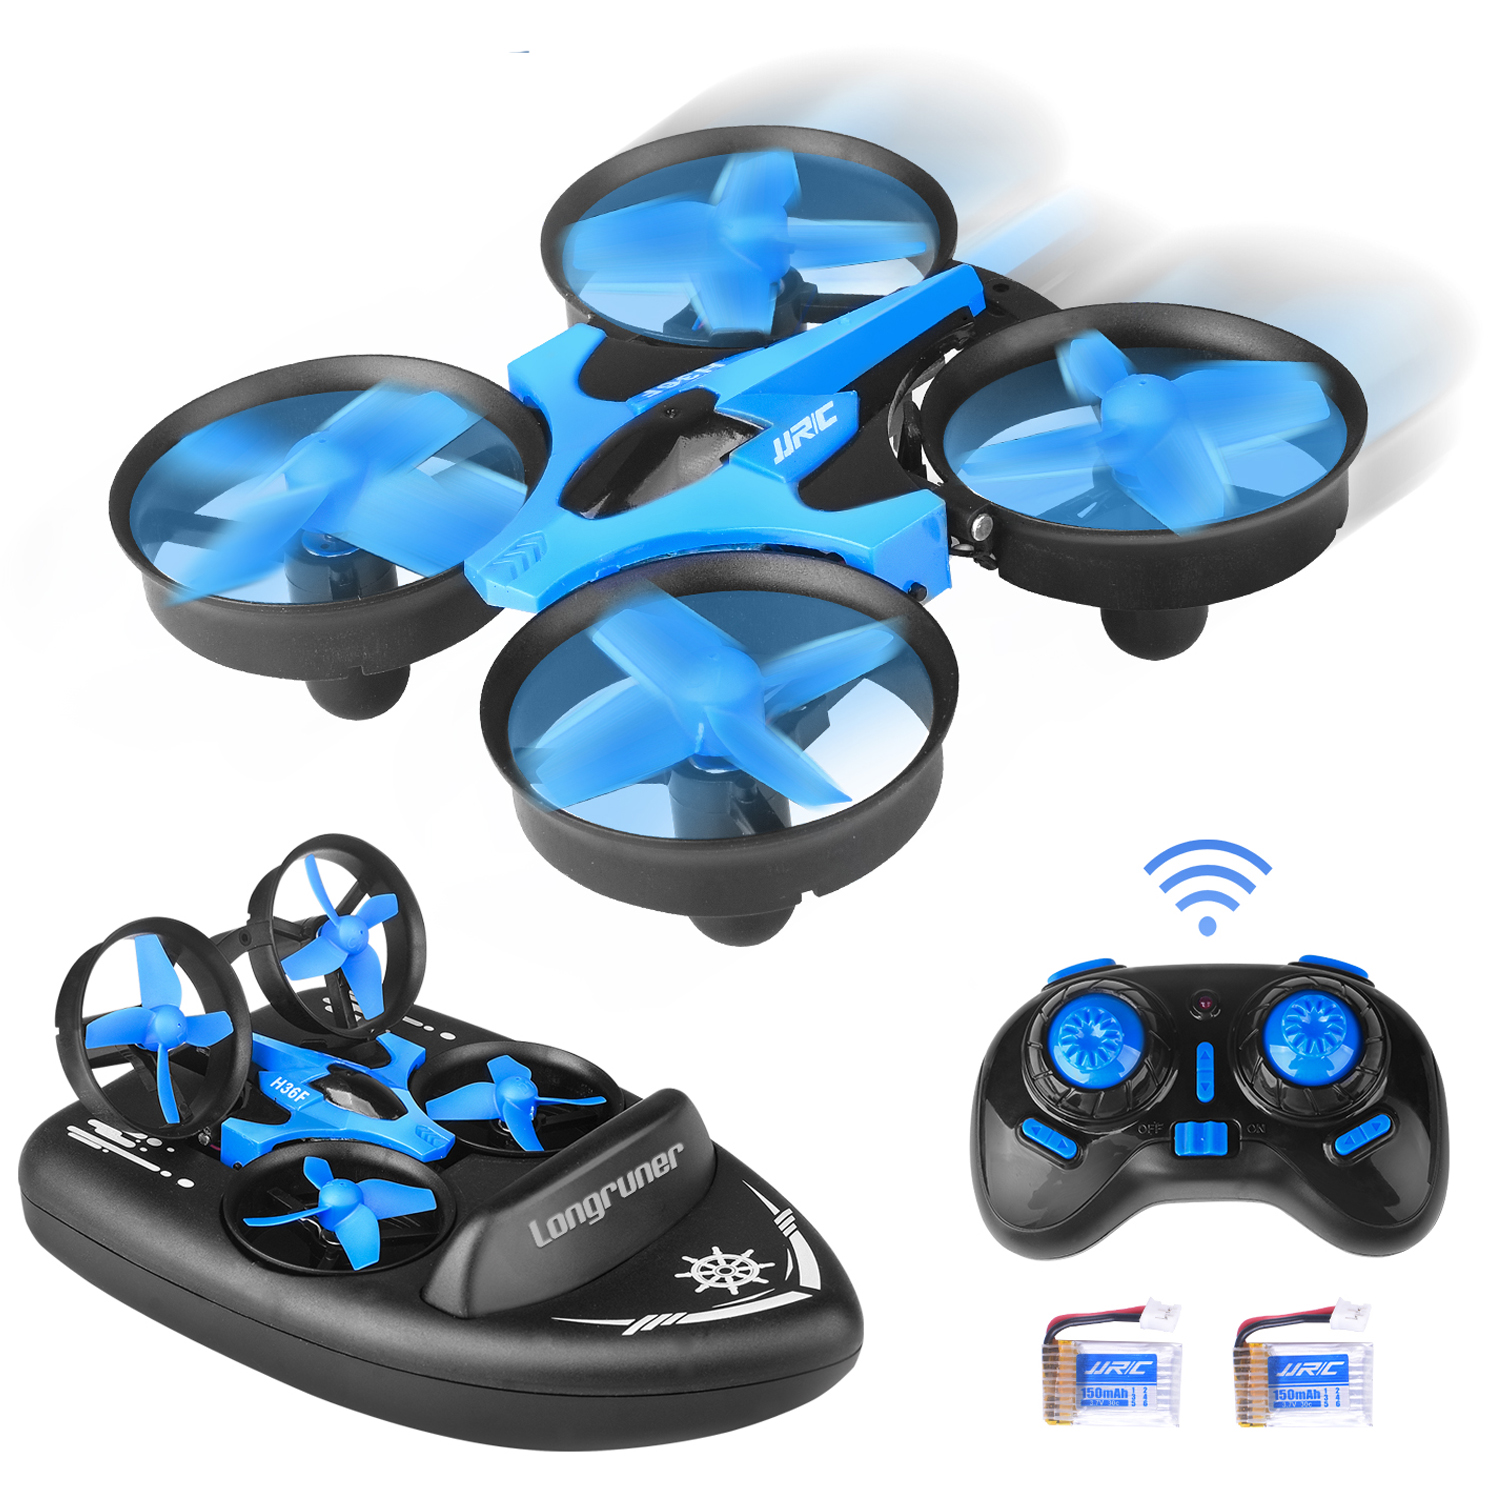 Drone for Kids, Longruner 3 in 1 Sea-Land-Air Mode RC Drone